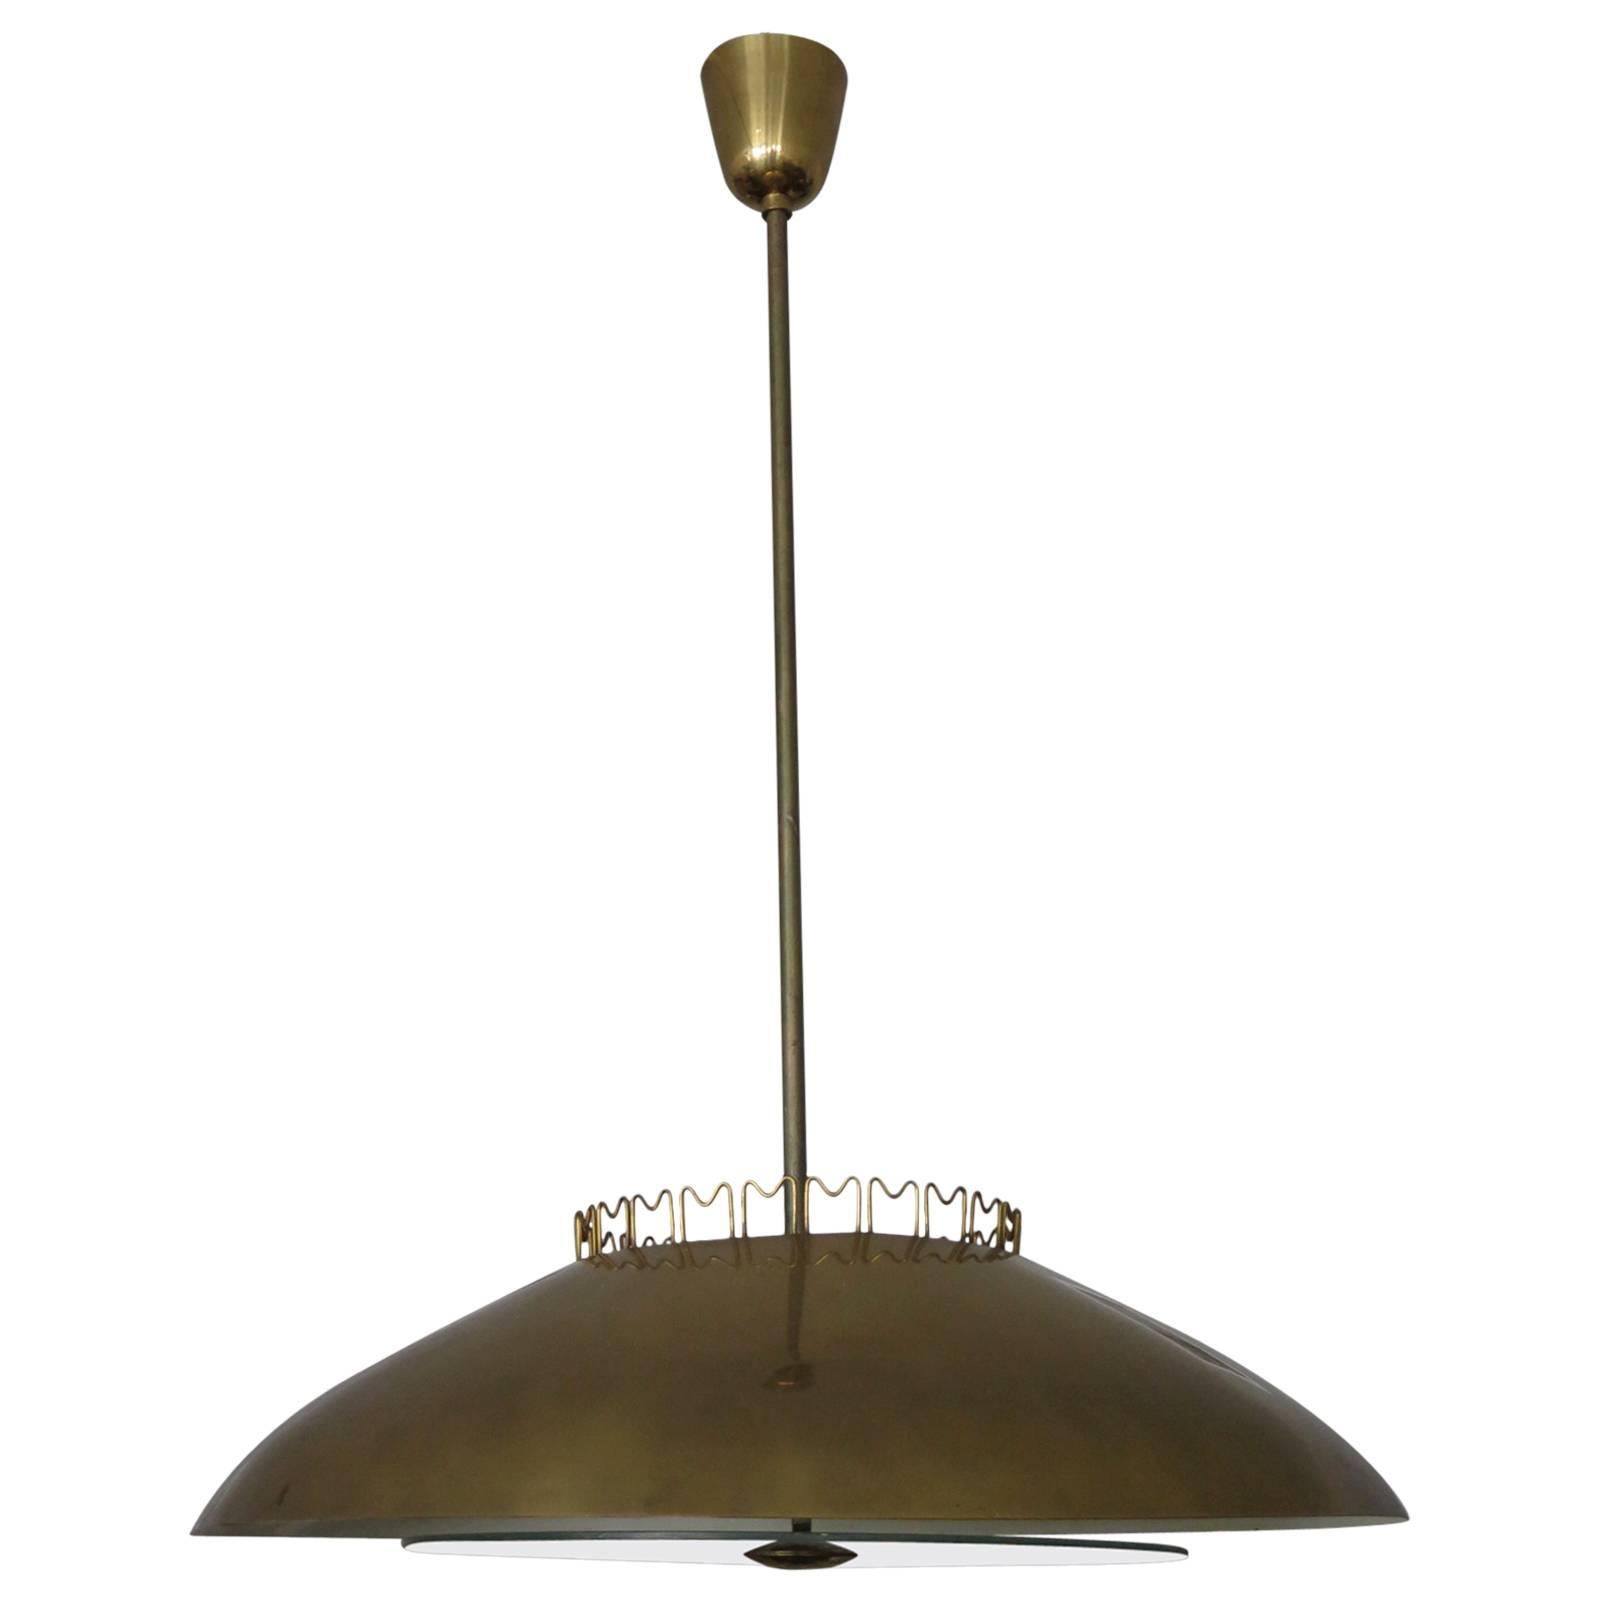 Brass Chandelier by Lisa Johansson-Pape  for Orno, Finland, 1950's.